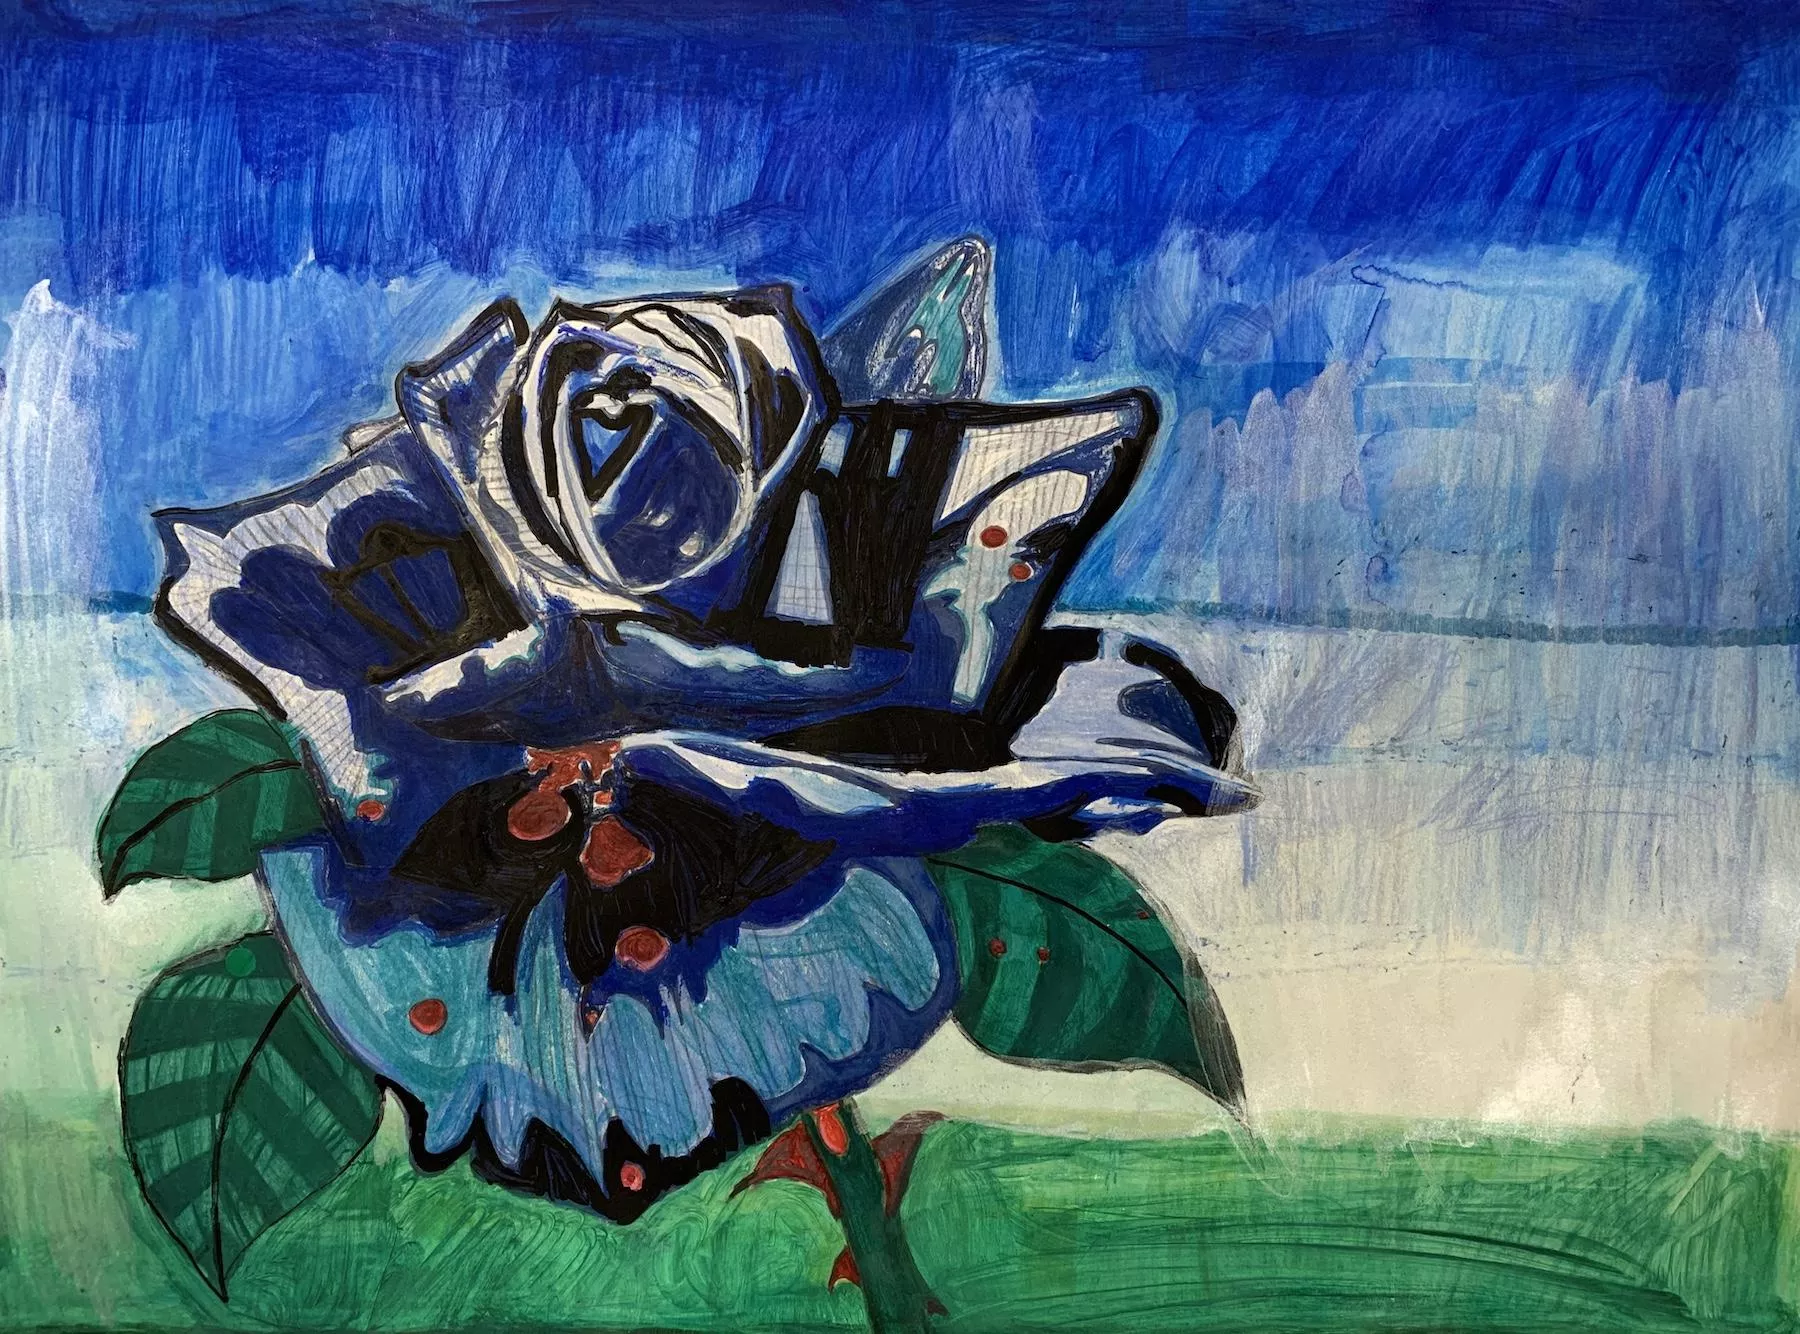 alt="A blue rose-like flower with three green, striped leaves and a thorny stem is located center-left in the foreground, displayed before a top to bottom background fading from blue to white to green."